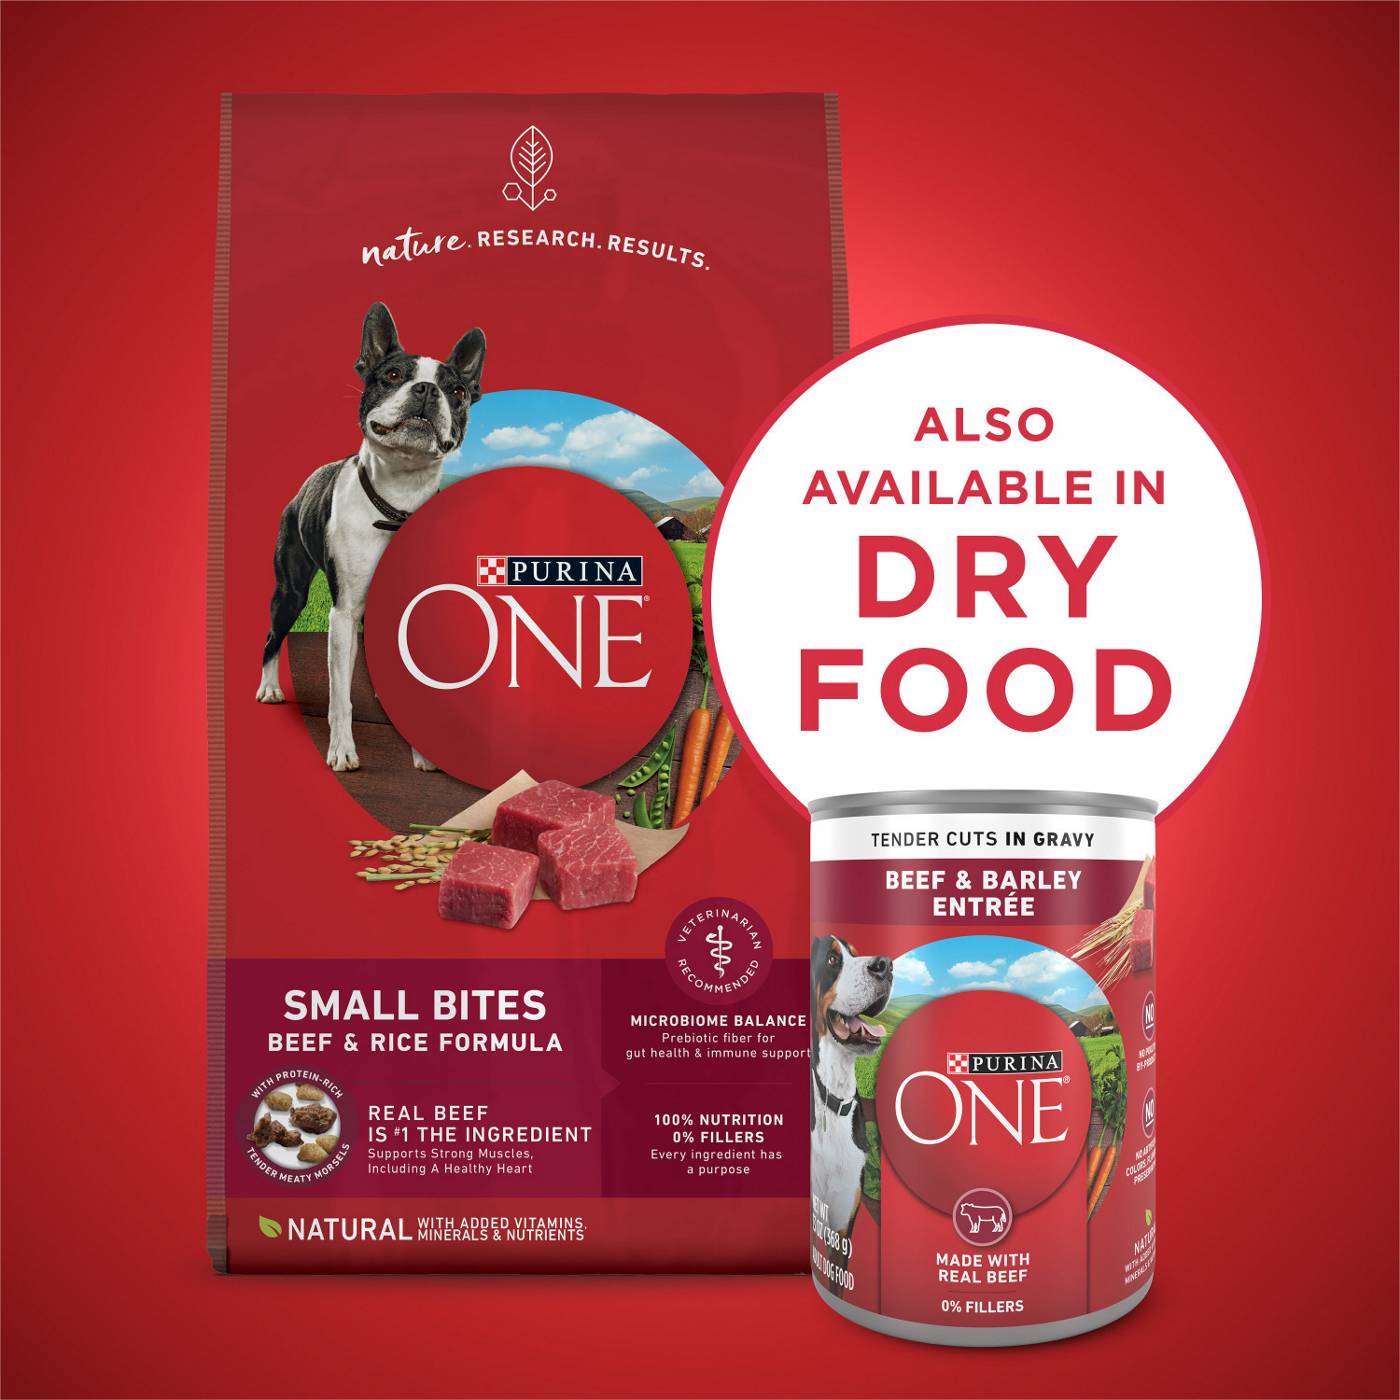 Purina ONE Purina ONE Tender Cuts in Gravy Beef and Barley Entree in Wet Dog Food Gravy; image 3 of 6